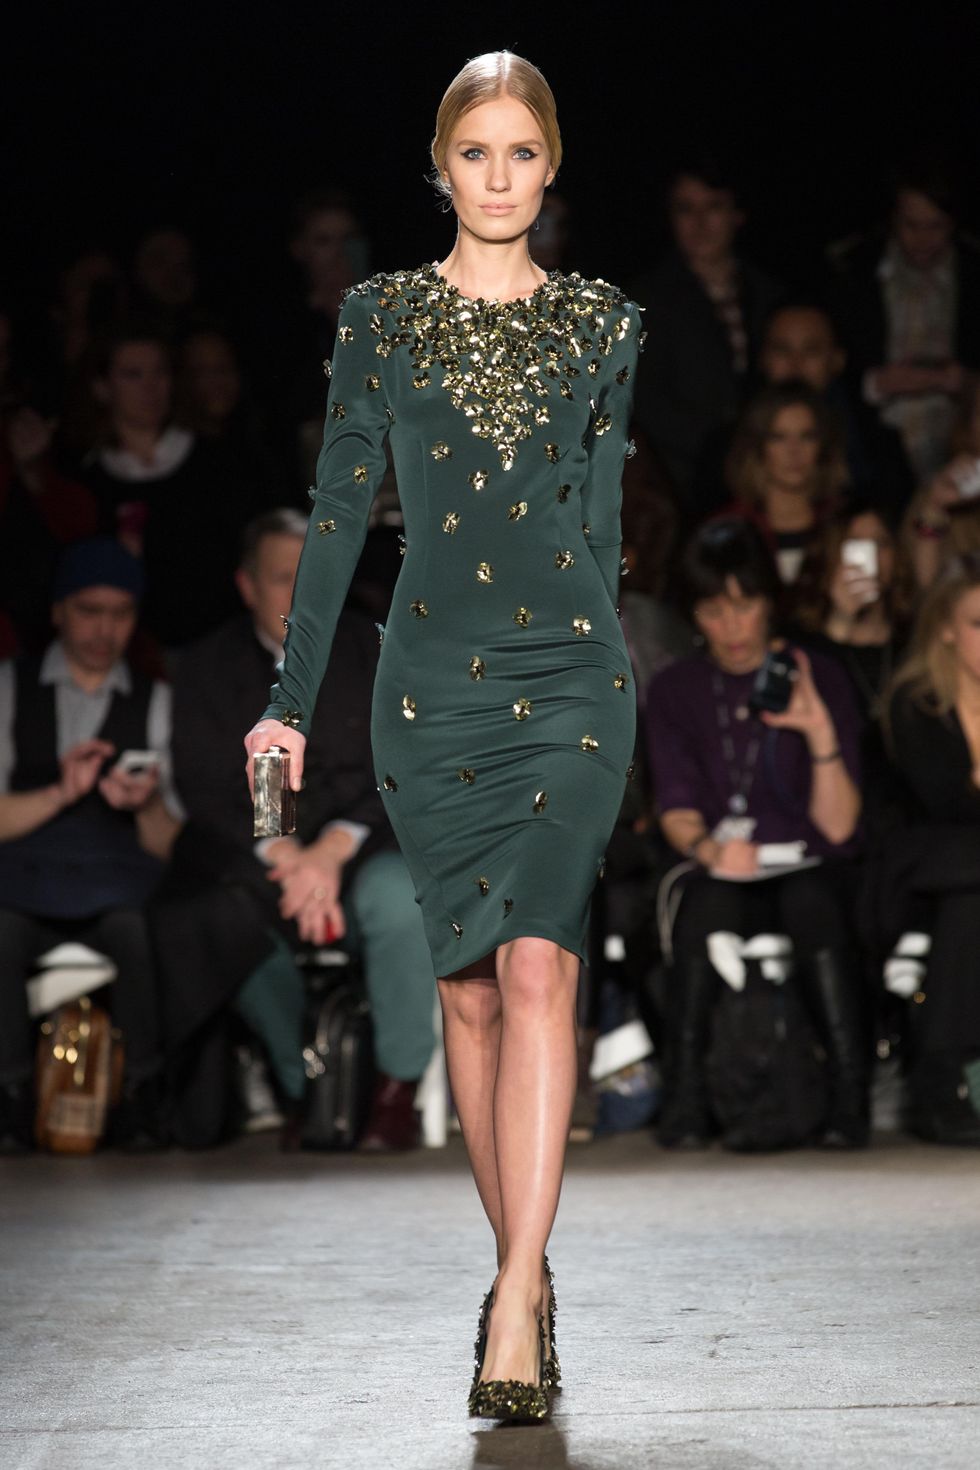 Christian Siriano fall collection look 25